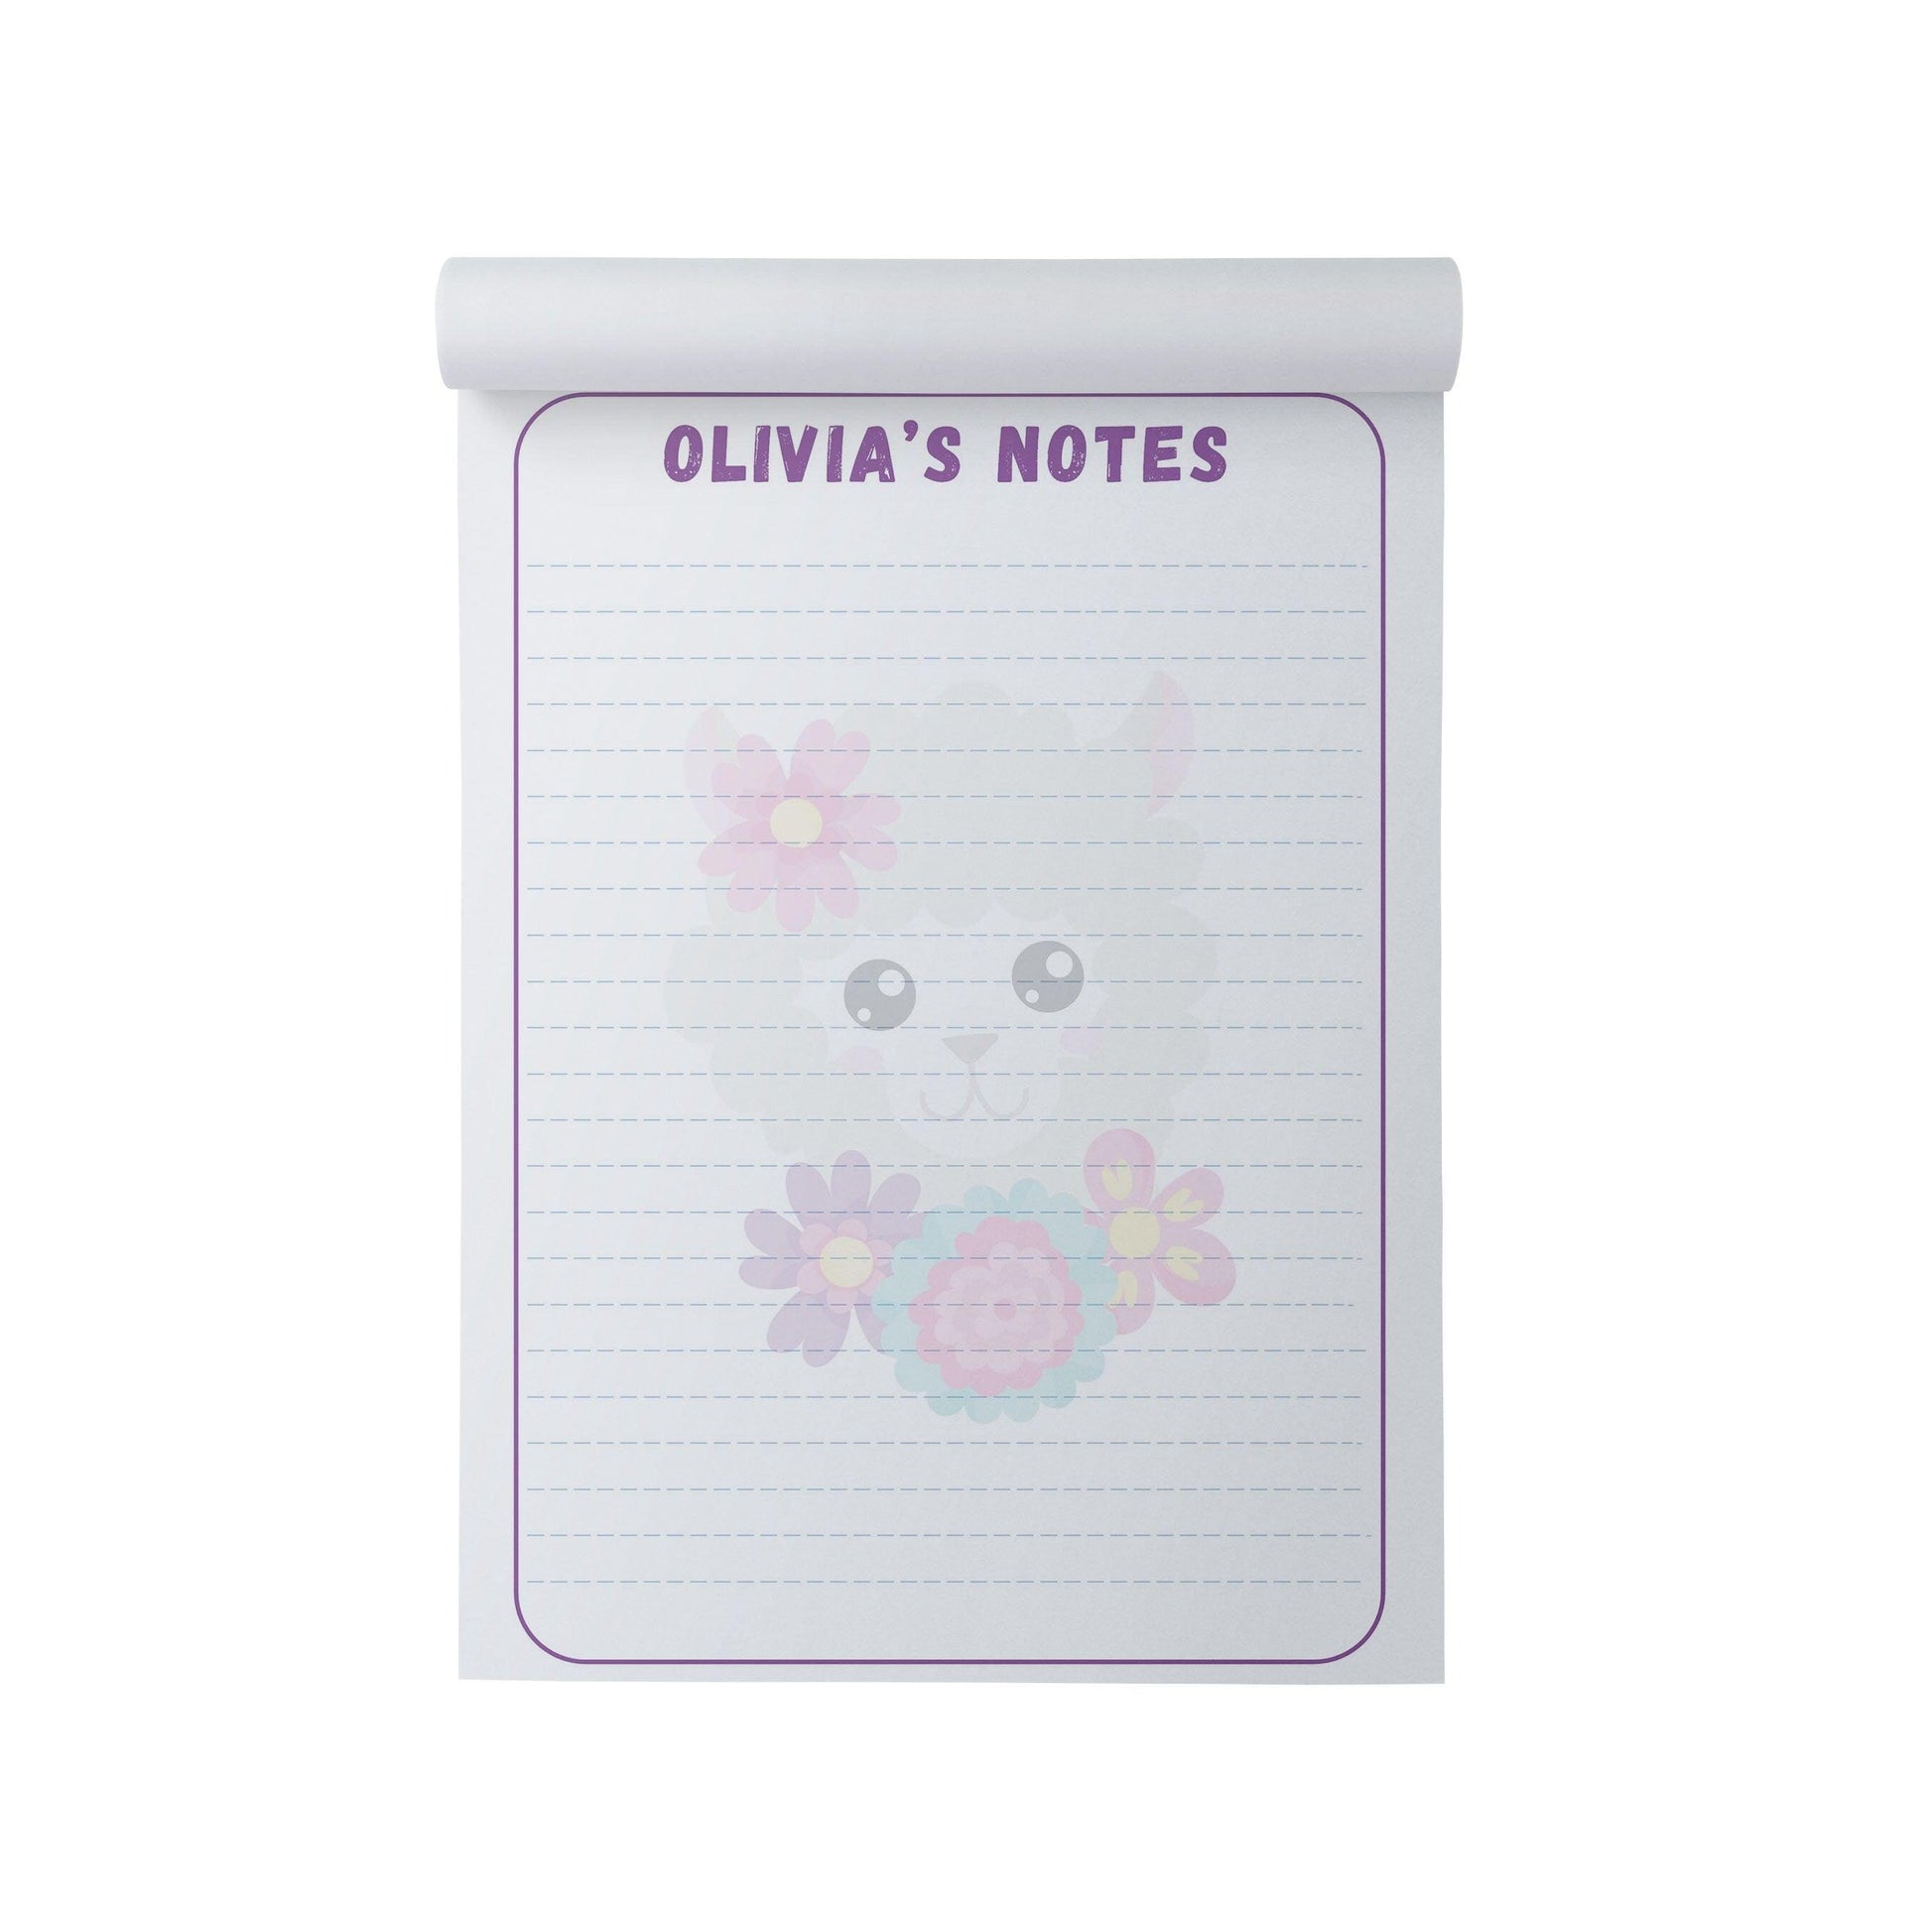  Llama Personalised Note Pad, A5 With 50 Tear-off Sheets by PMPRINTED 